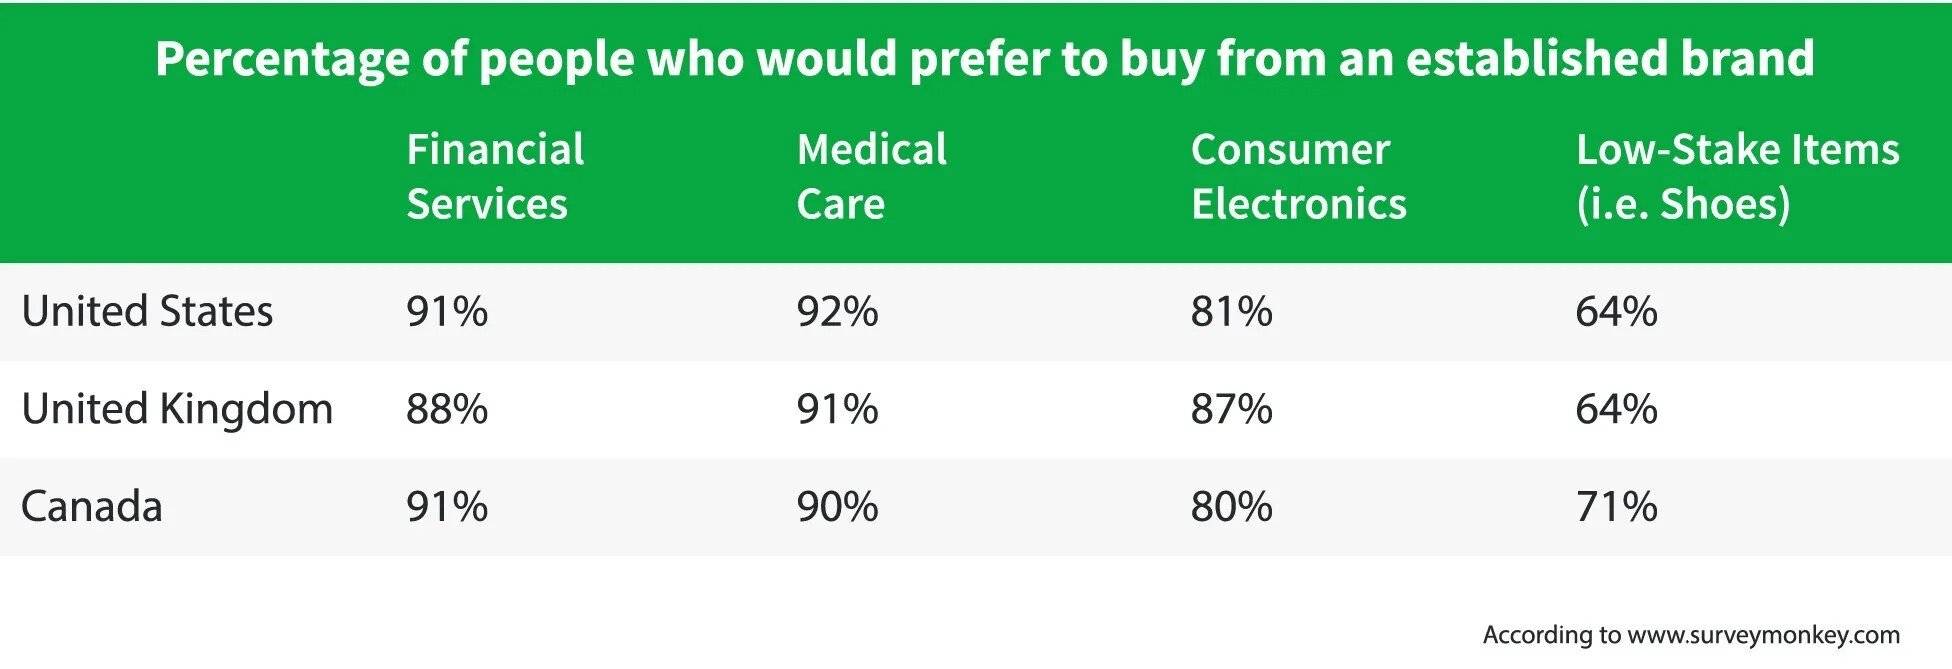 Chart showing the percentage of customers in the U.S., U.K., and Canada who prefer to buy from established brands.